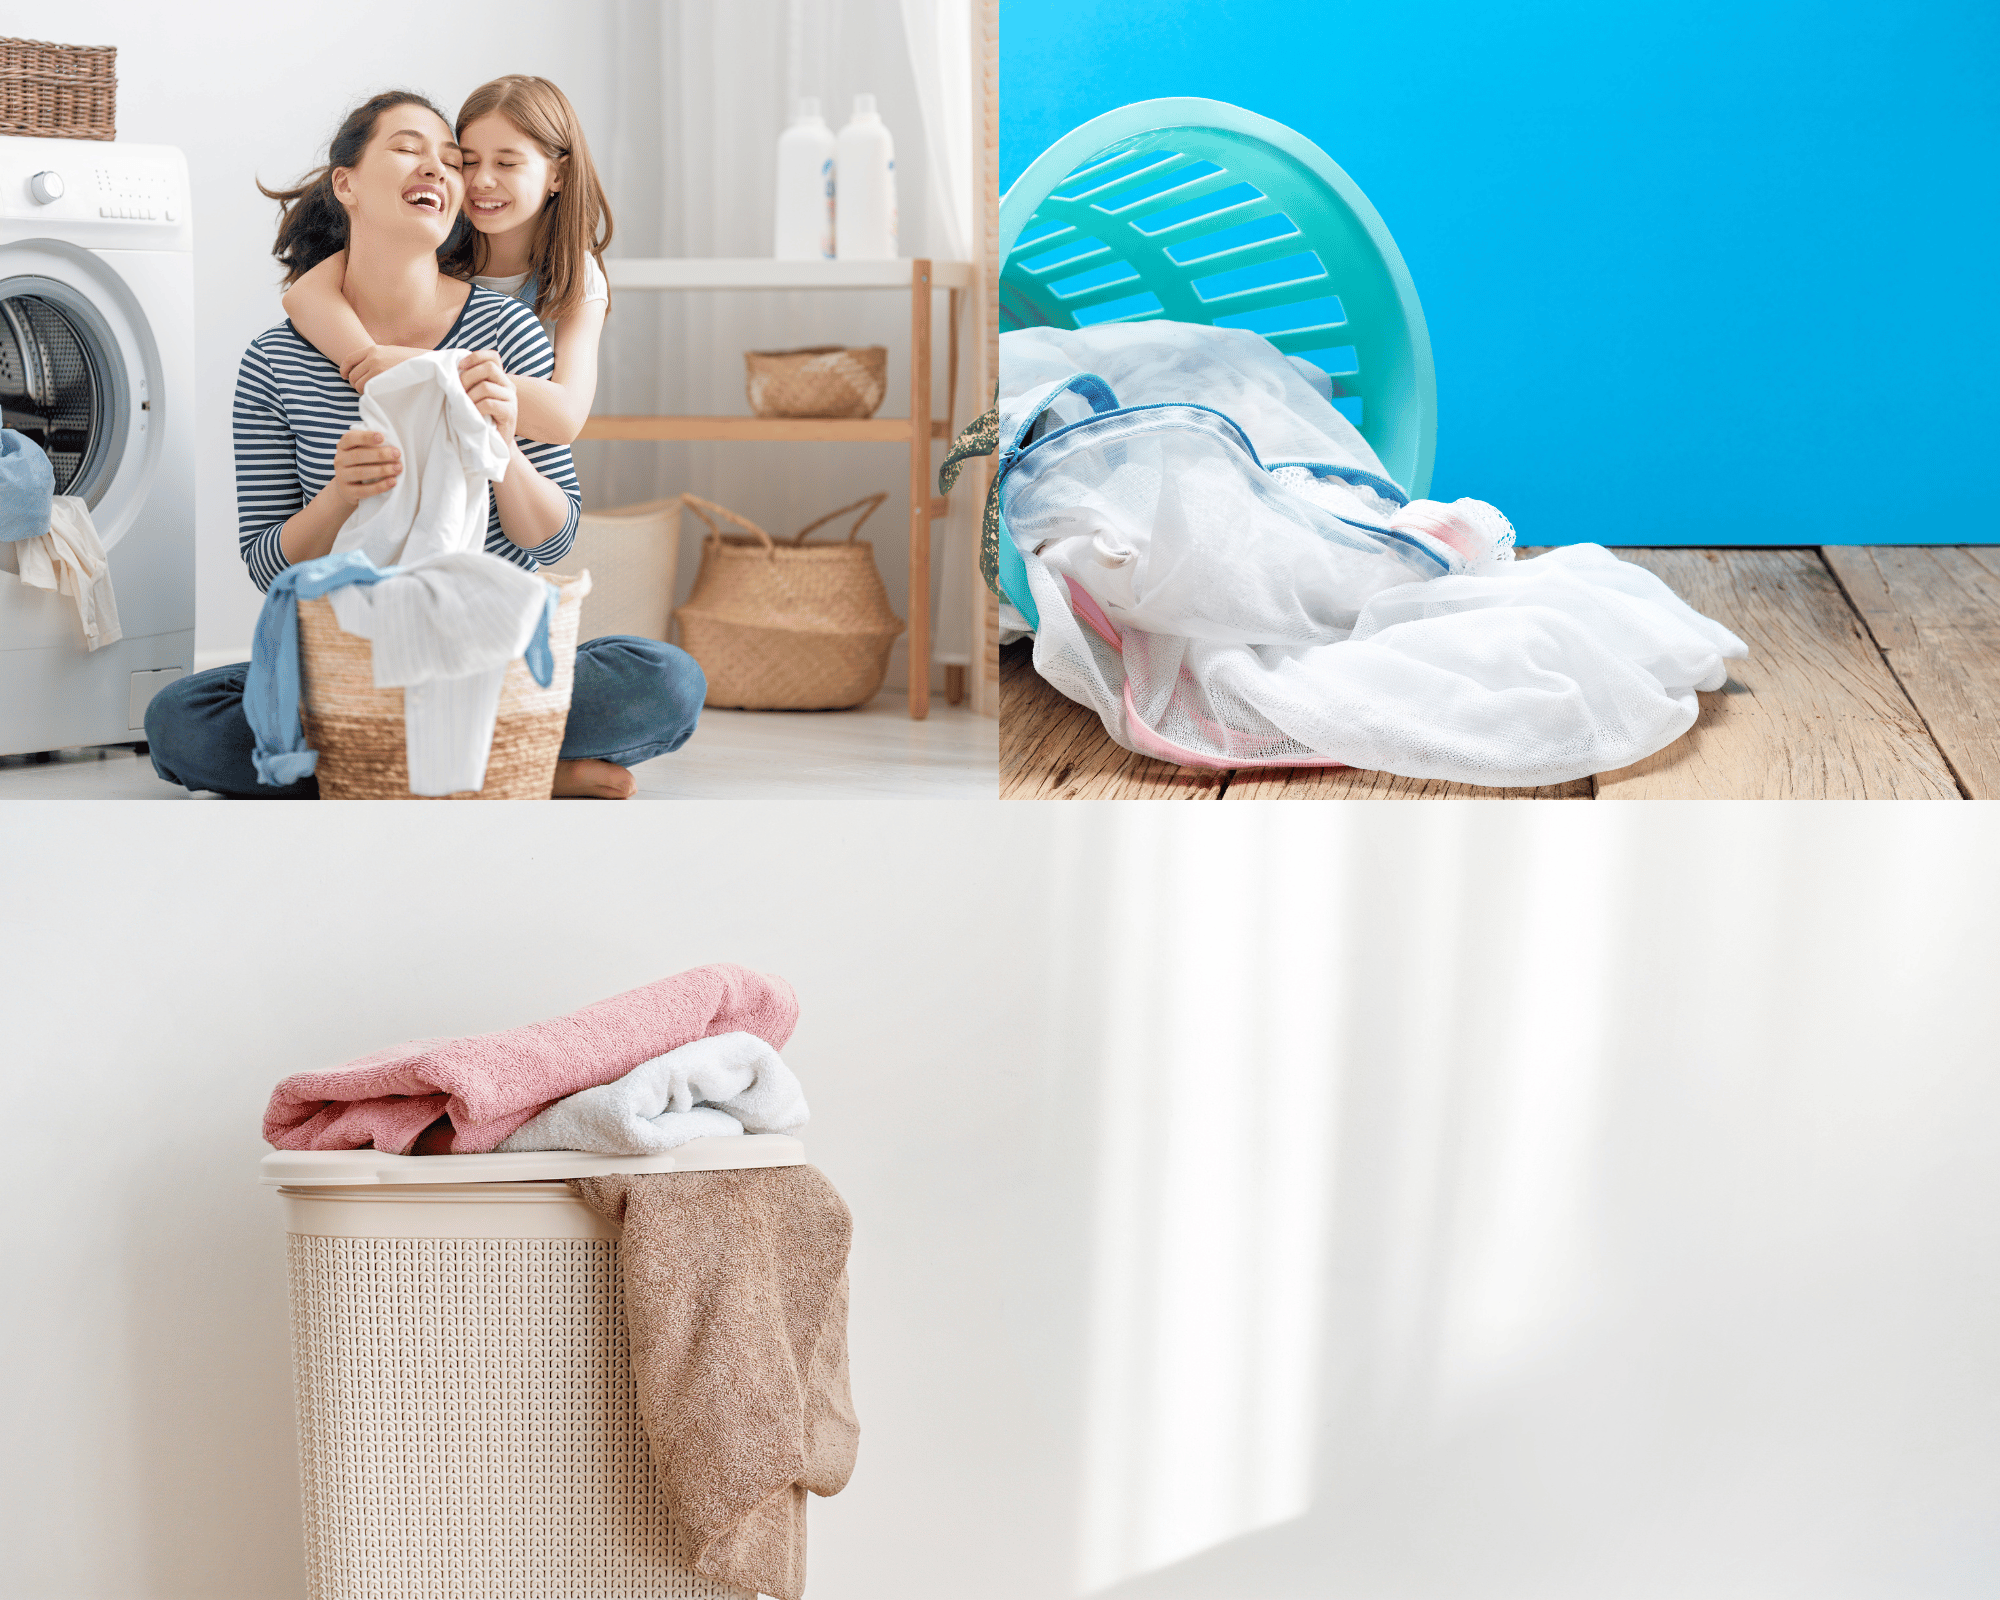 Rubbermaid Laundry Baskets That Will Revolutionize Your Laundry Routine